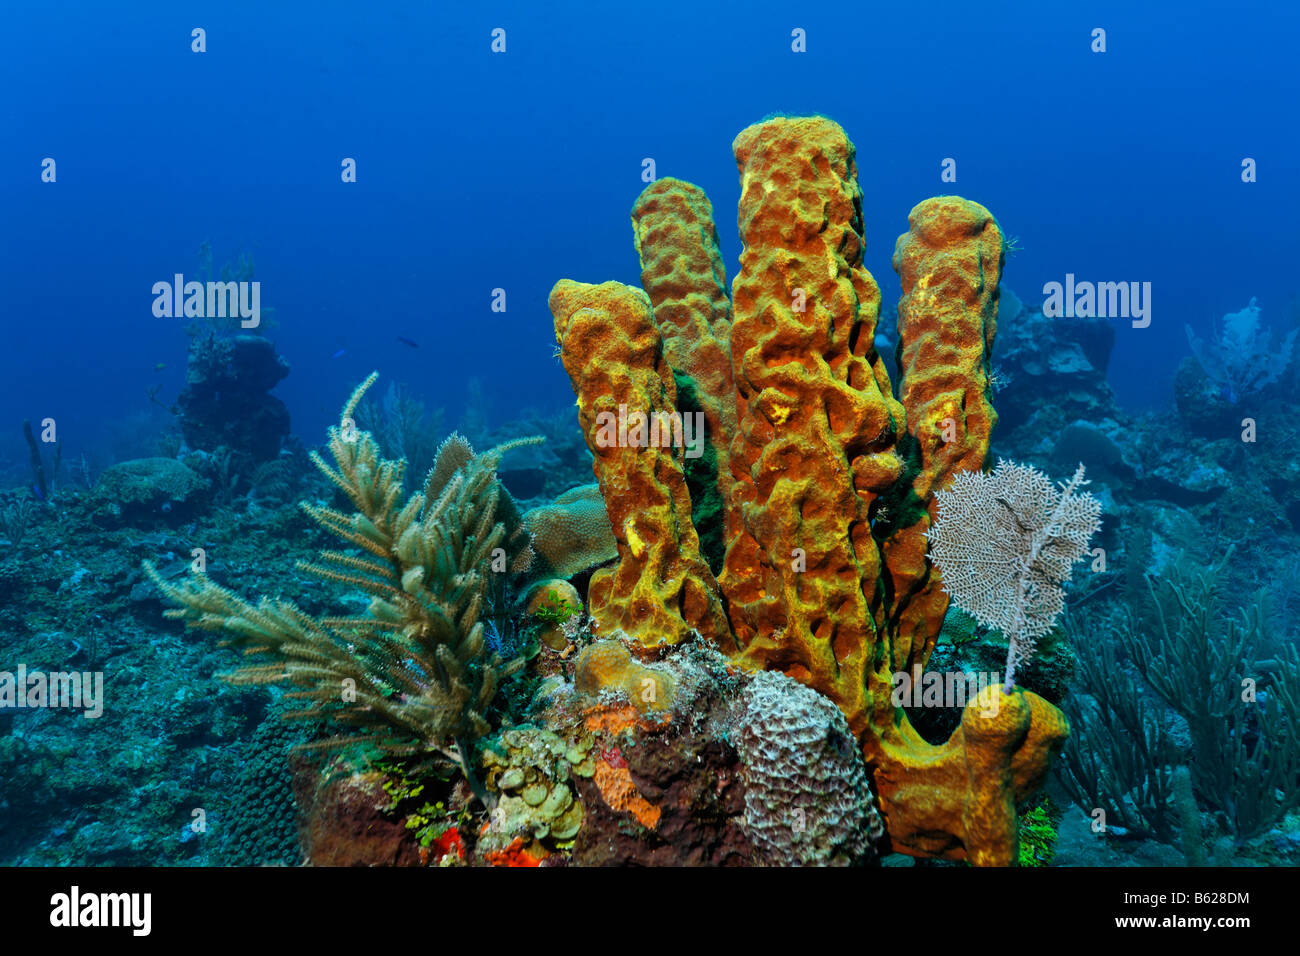 Stove Pipe Sponge (Aplysina sp.) growing amongst a variety of other corals on a coral reef, barrier reef, San Pedro, Ambergris  Stock Photo